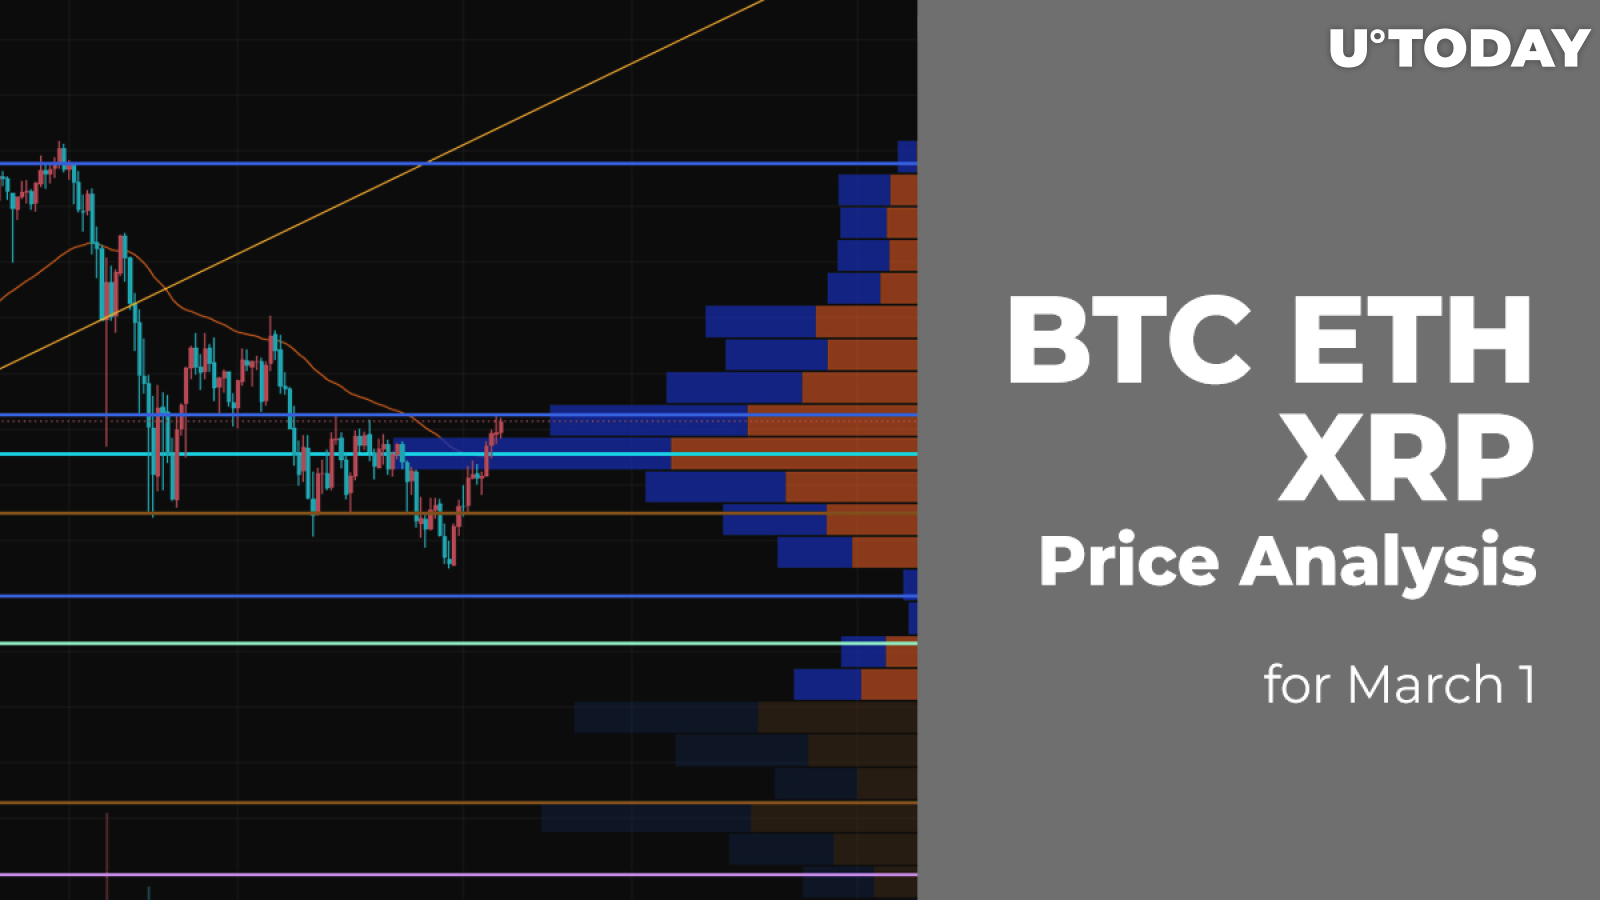 BTC, ETH and XRP Price Analysis for March 1